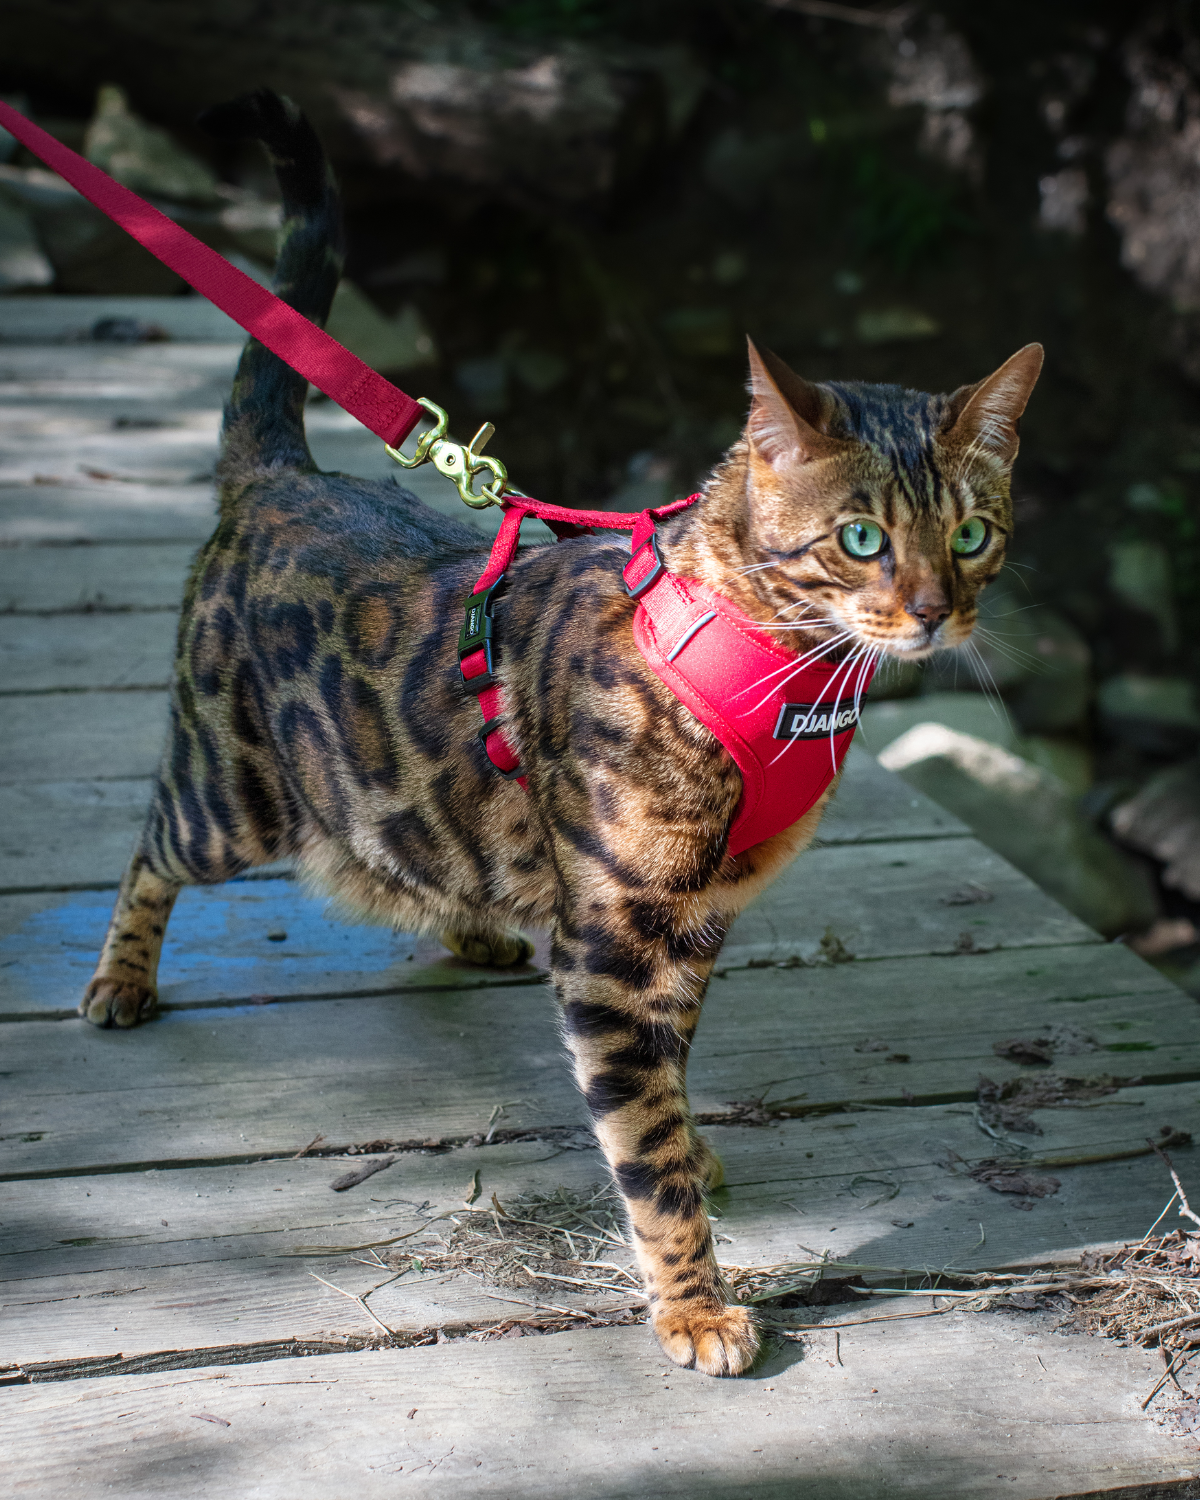 Loki is a Bengal cat and adventure cat and wears size small in DJANGO Adventure Cat Harnesses. DJANGO's travel cat harness feature a padded and lightweight body, soft custom webbing for max comfort, a breathable sport mesh lining, reflective piping, and a beautiful solid cast brass D-ring. - djangobrand.com